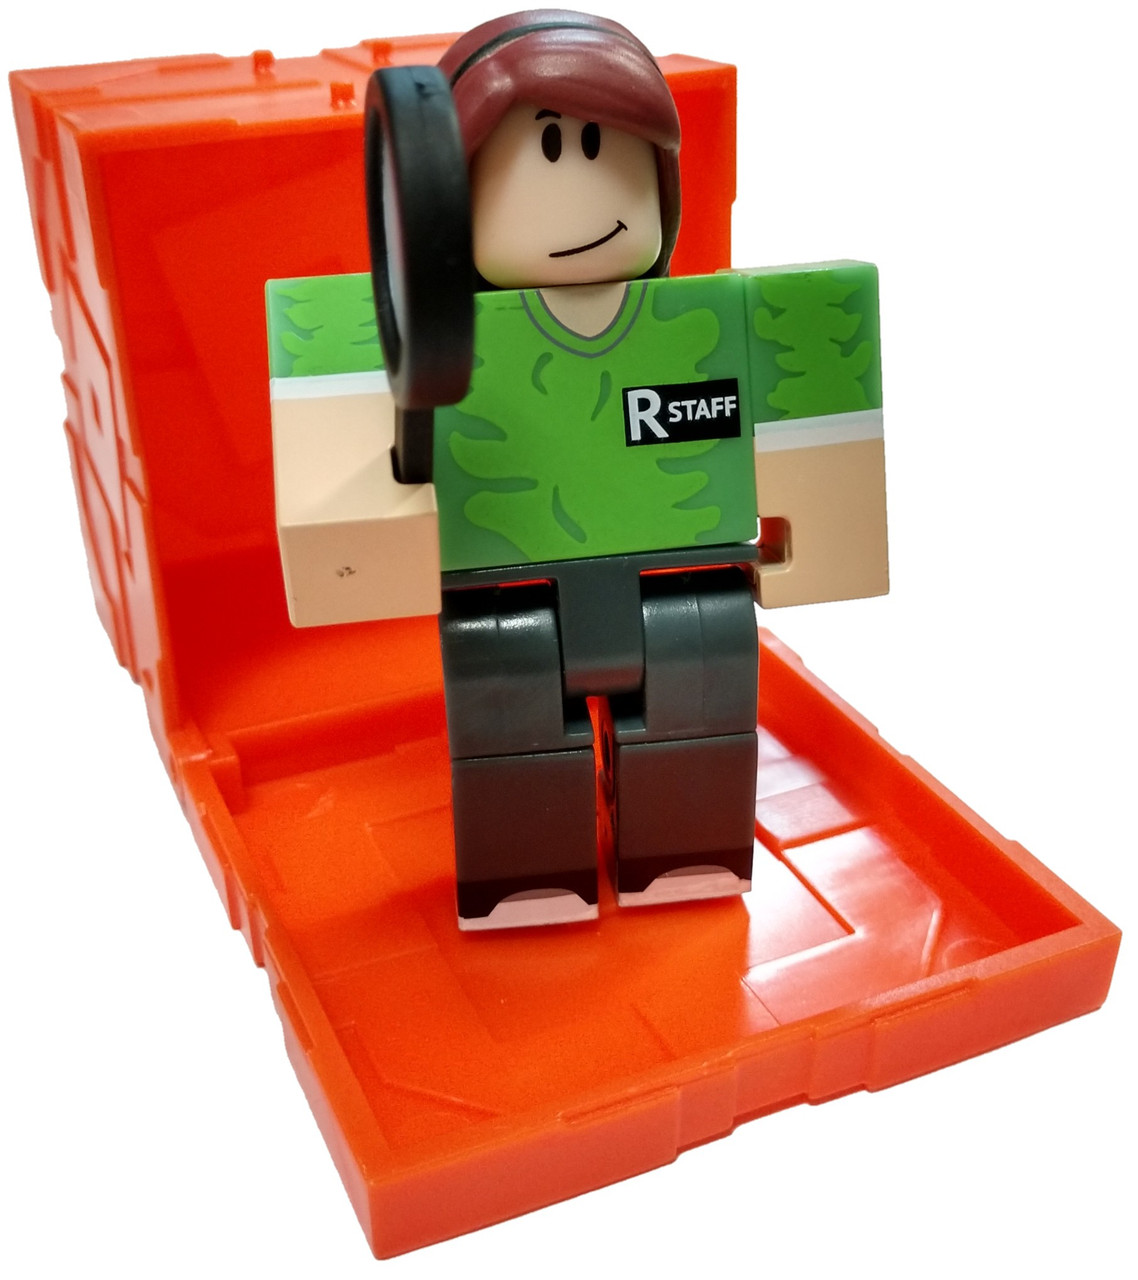 Roblox Series 6 Roblox History Museum Sales Staff 3 Mini Figure With Orange Cube And Online Code Loose Jazwares Toywiz - roblox gear reviews zombie staff